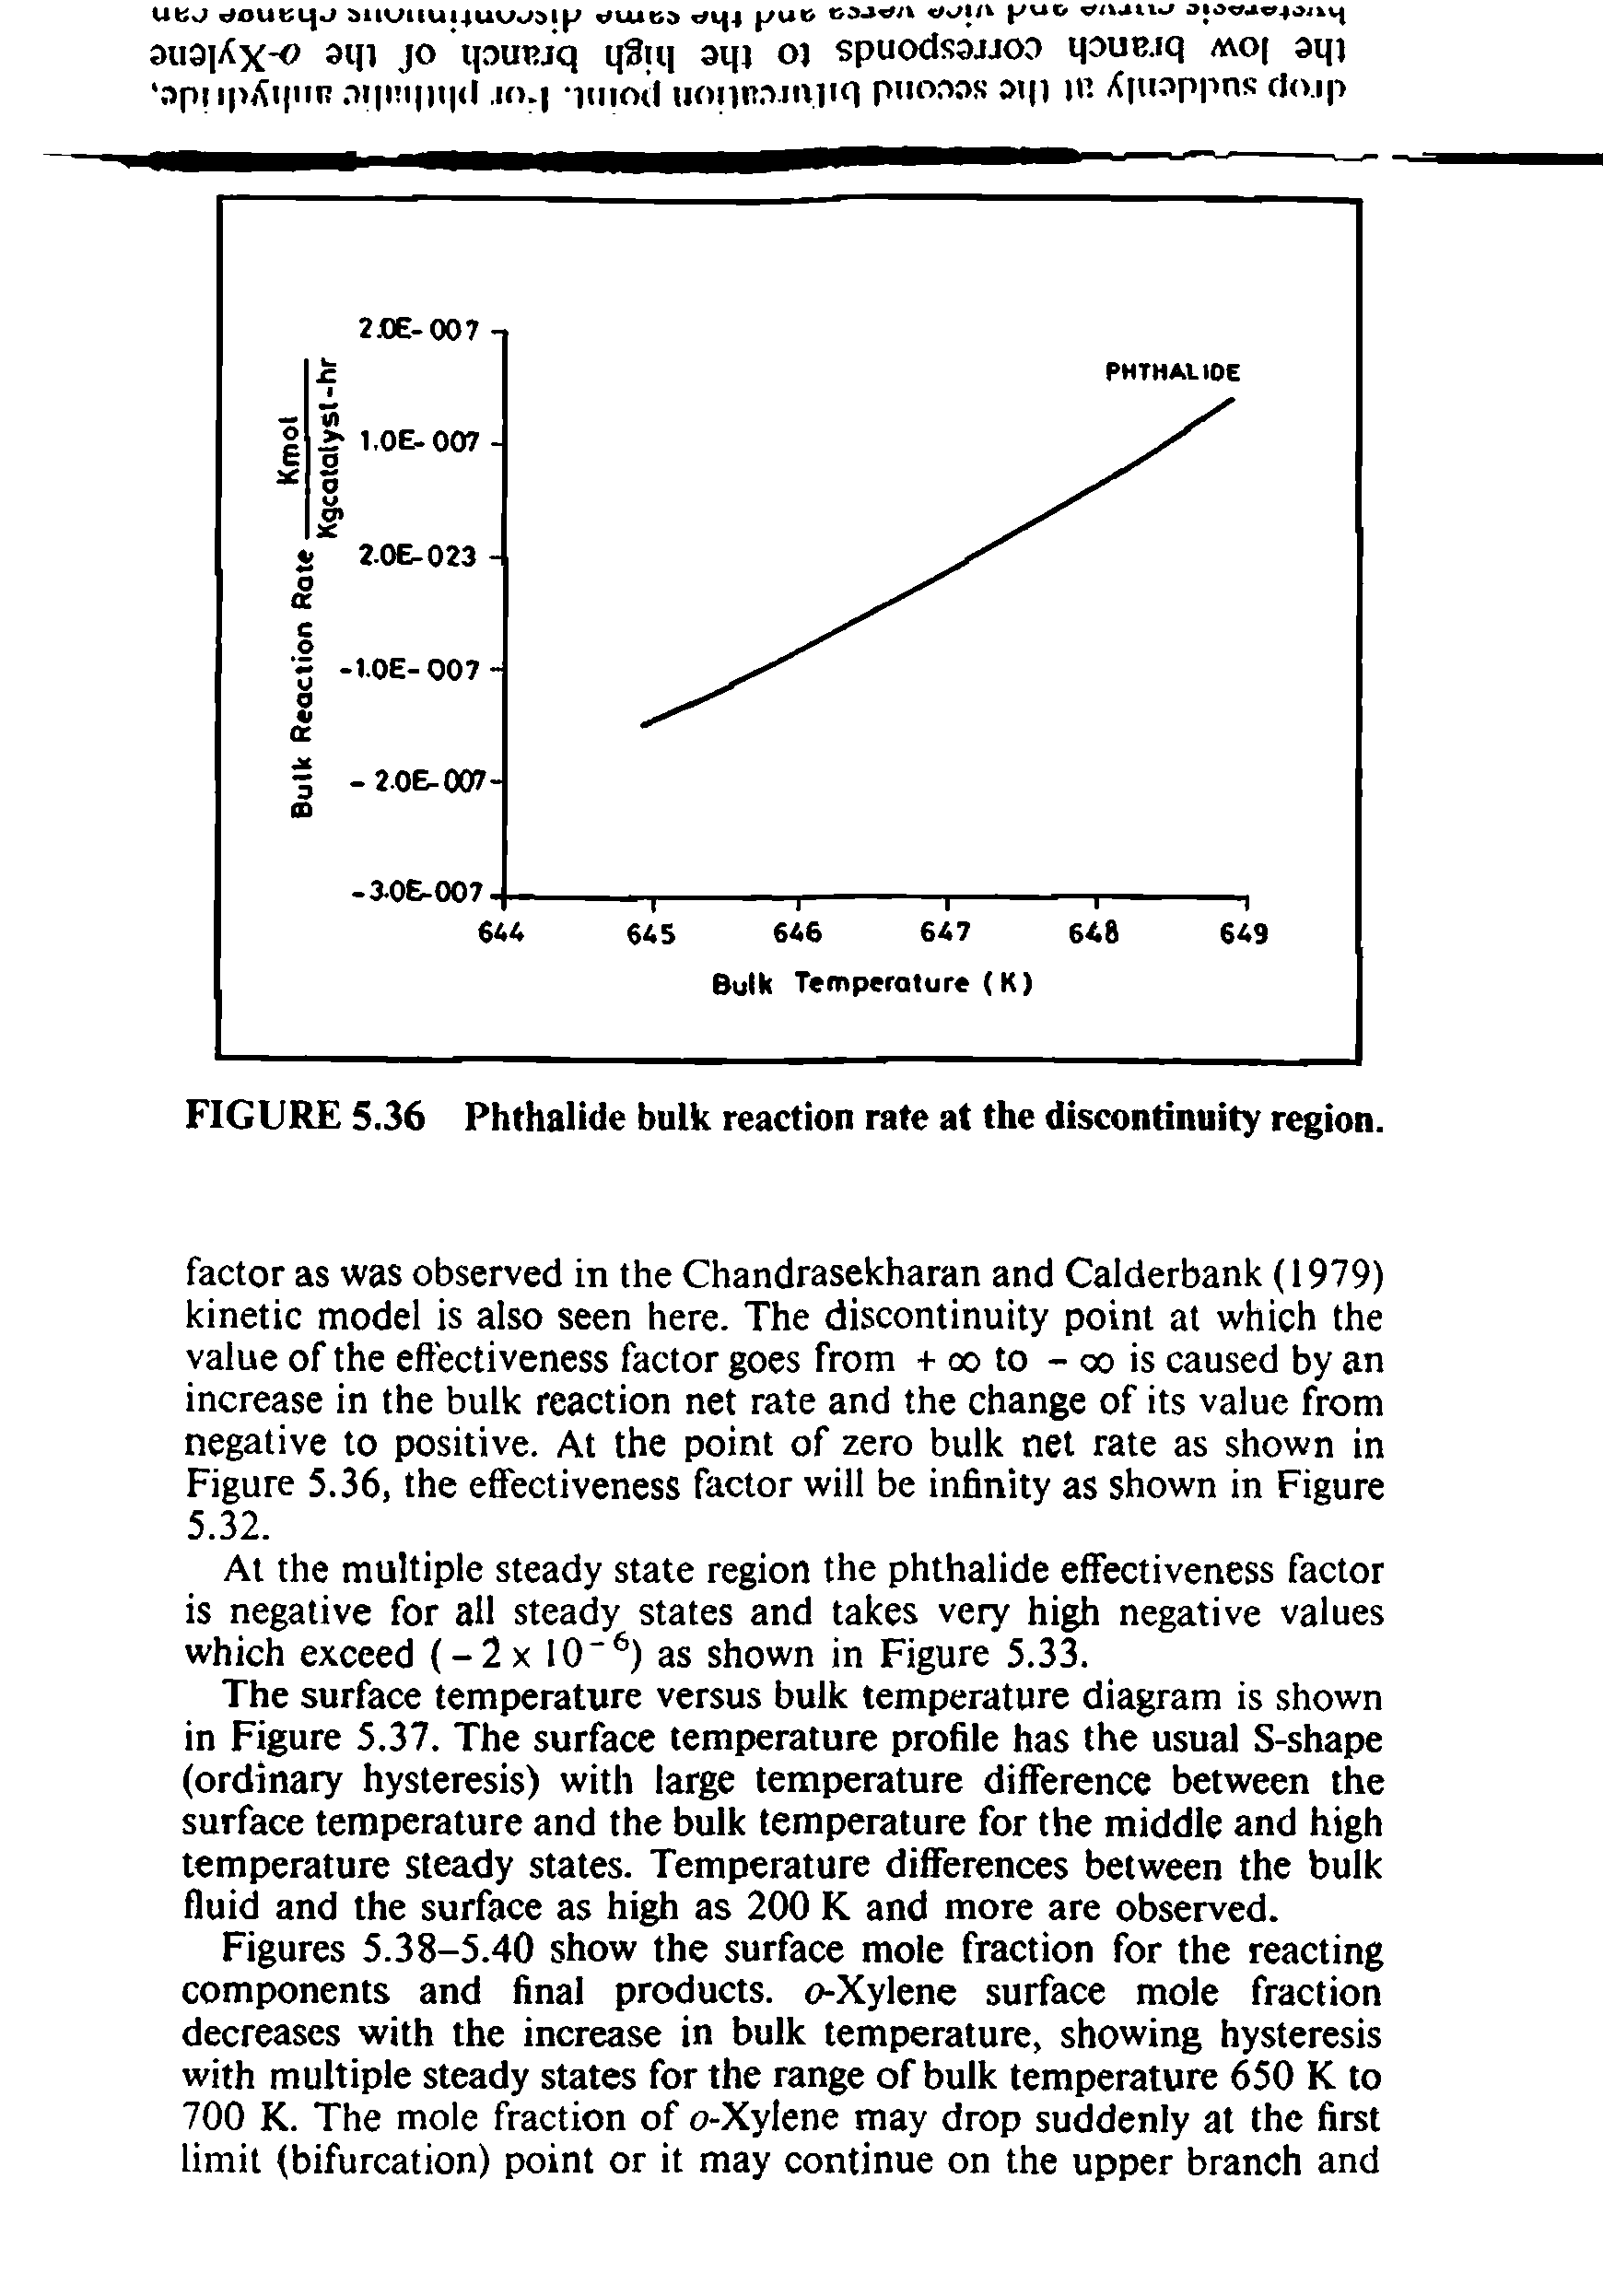 Figures 5.38-5.40 show the surface mole fraction for the reacting components and final products. o-Xylene surface mole fraction decreases with the increase in bulk temperature, showing hysteresis with multiple steady states for the range of bulk temperature 650 K to 700 K. The mole fraction of o-Xylene may drop suddenly at the first limit (bifurcation) point or it may continue on the upper branch and...